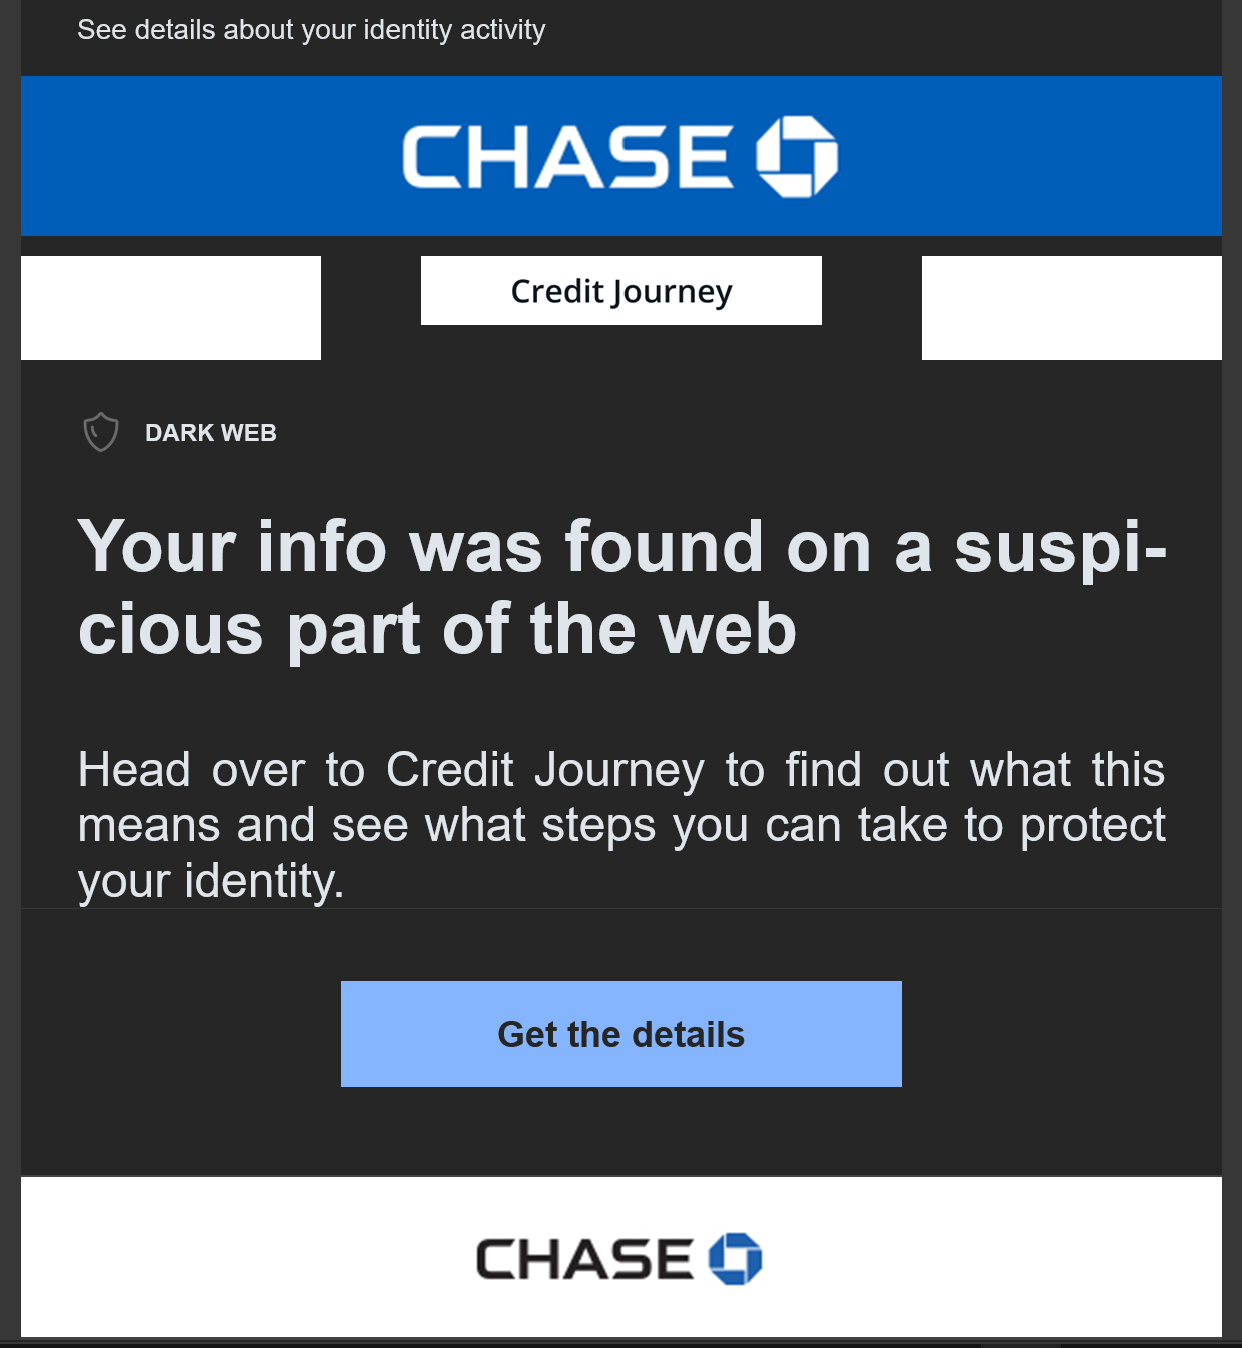 Screenshot of an email from Chase with text that reads "Your info was found on a suspicious part of the web."